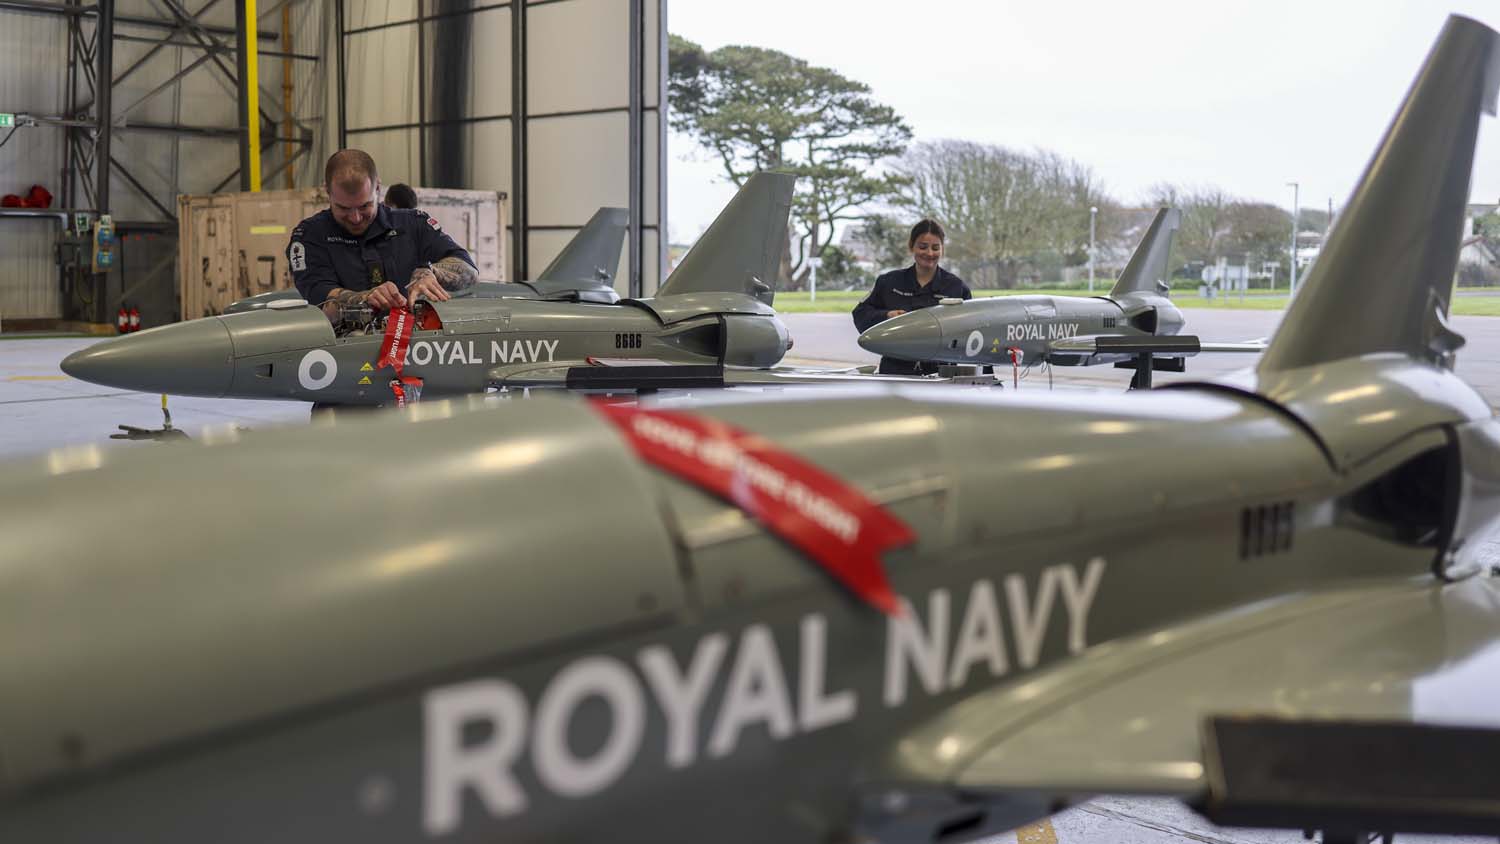 New drone welcomed into Royal Navy